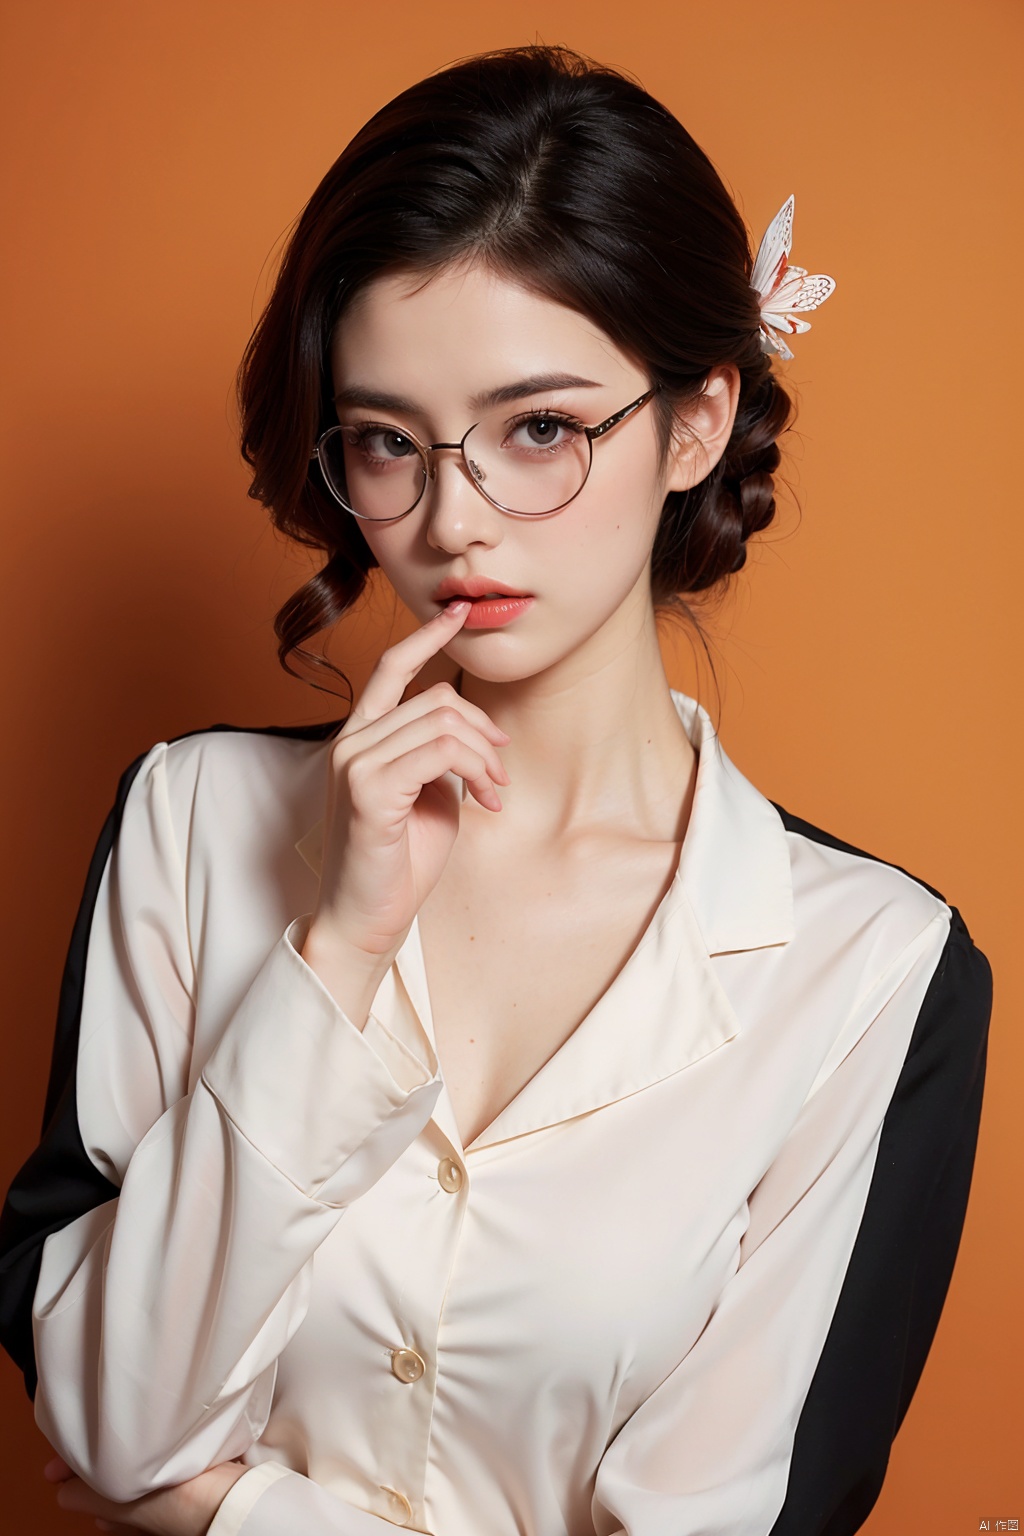 a photo of a glass woman, teenager, egirl, cosplay, 16yo, (Vintage hairstyle | Victory Rolls),butterfly glasses, big lips, round_eyewear, solo, pride, upper_body, (looking at the viewer:1.1), orange_background, realistic,pink Long-sleeved secretary blouse with high collar, 80s-style glasses, chin lifted , silhouette_lighting, epiCRealism, backlight silhouette_lighting, epiCRealism, backlight